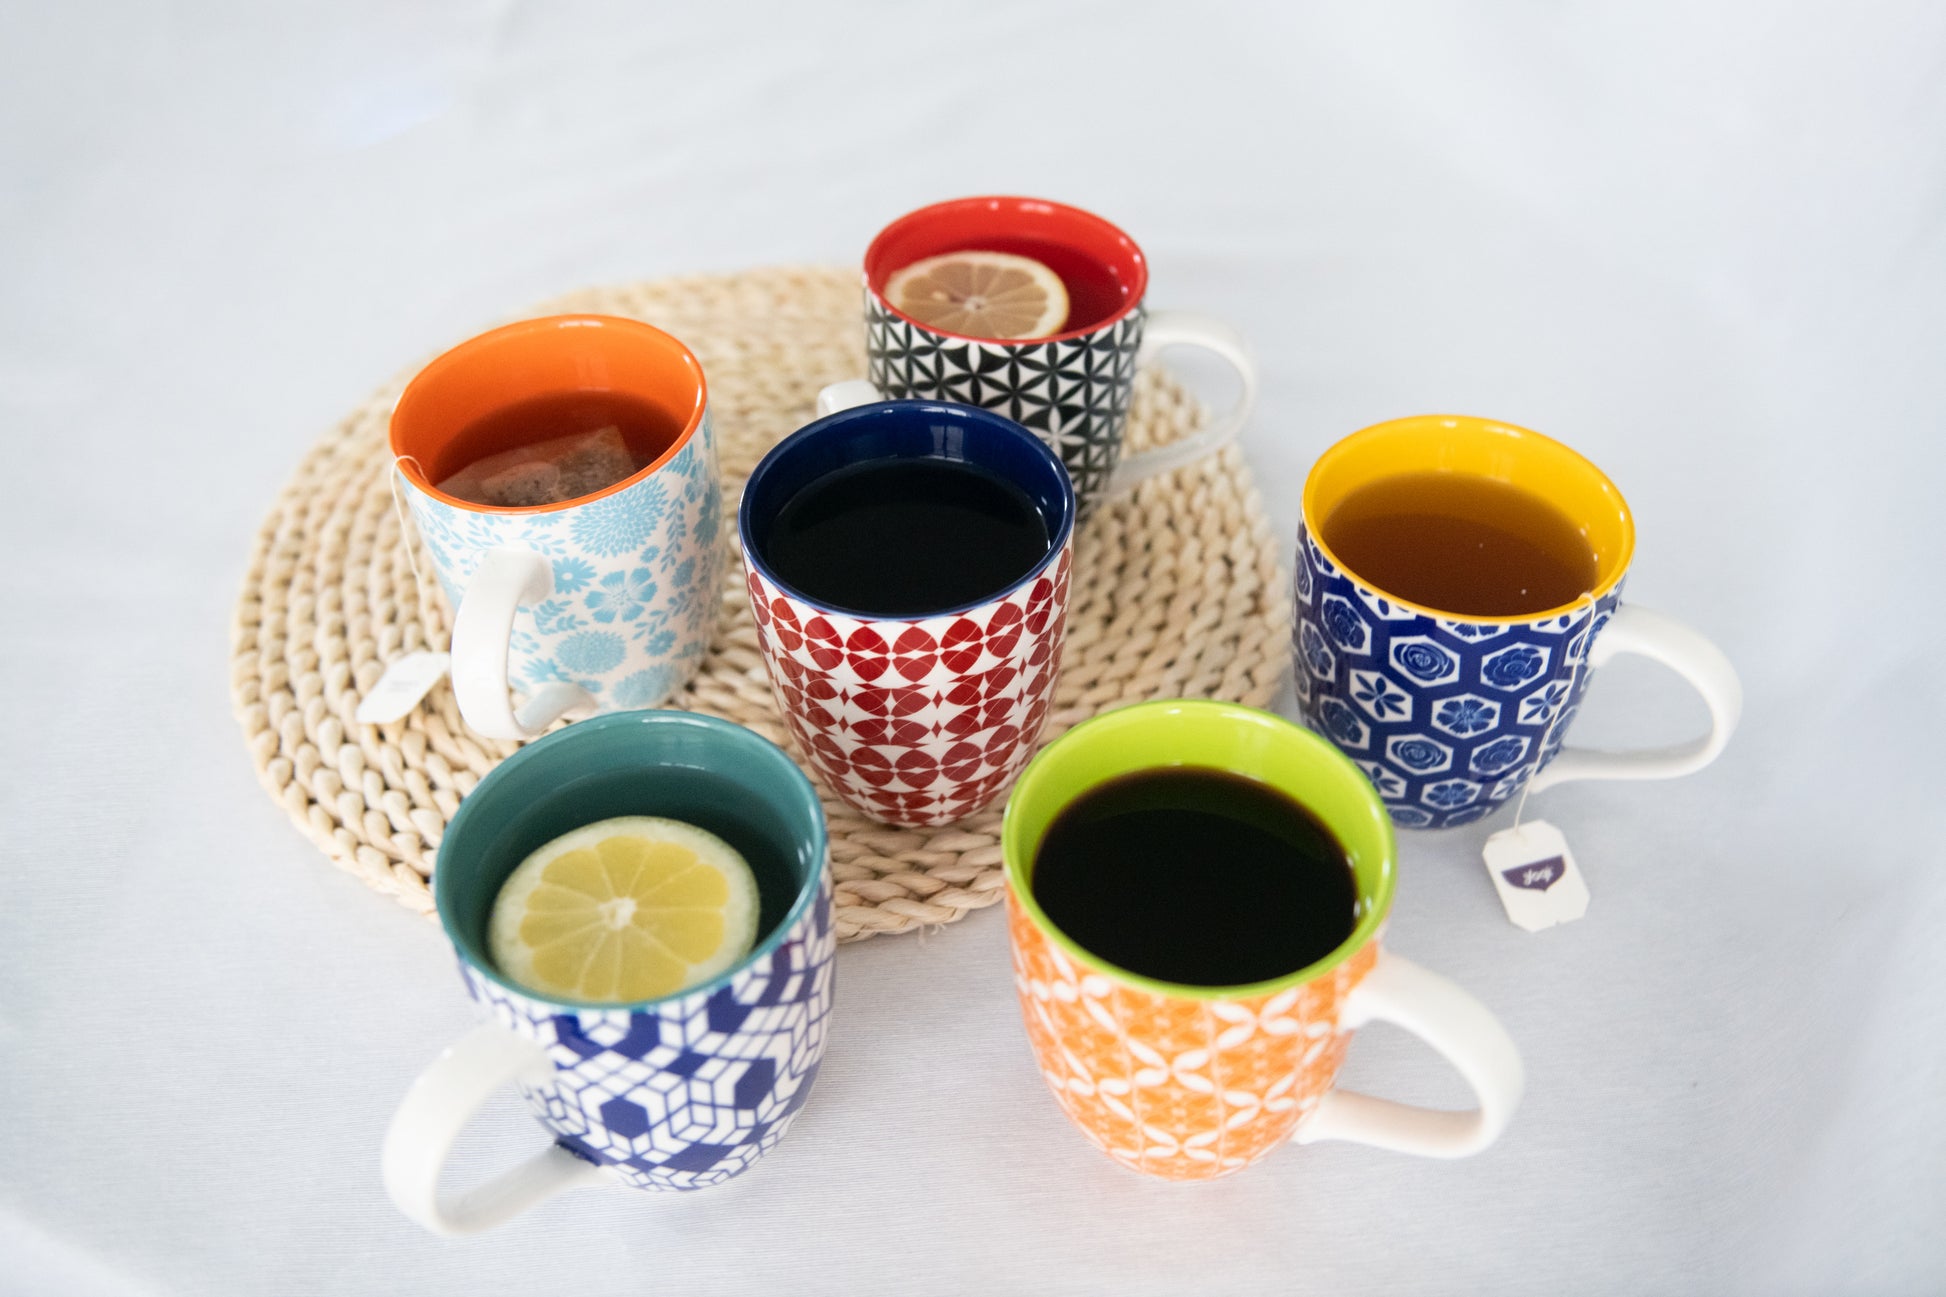 Annovero Coffee Mugs, Set of 6 Modern Colorful Cute Porcelain Mugs/Cups  with Large Handle, for Women or Men, Great for Tea, Cocoa or Hot Chocolate,  16